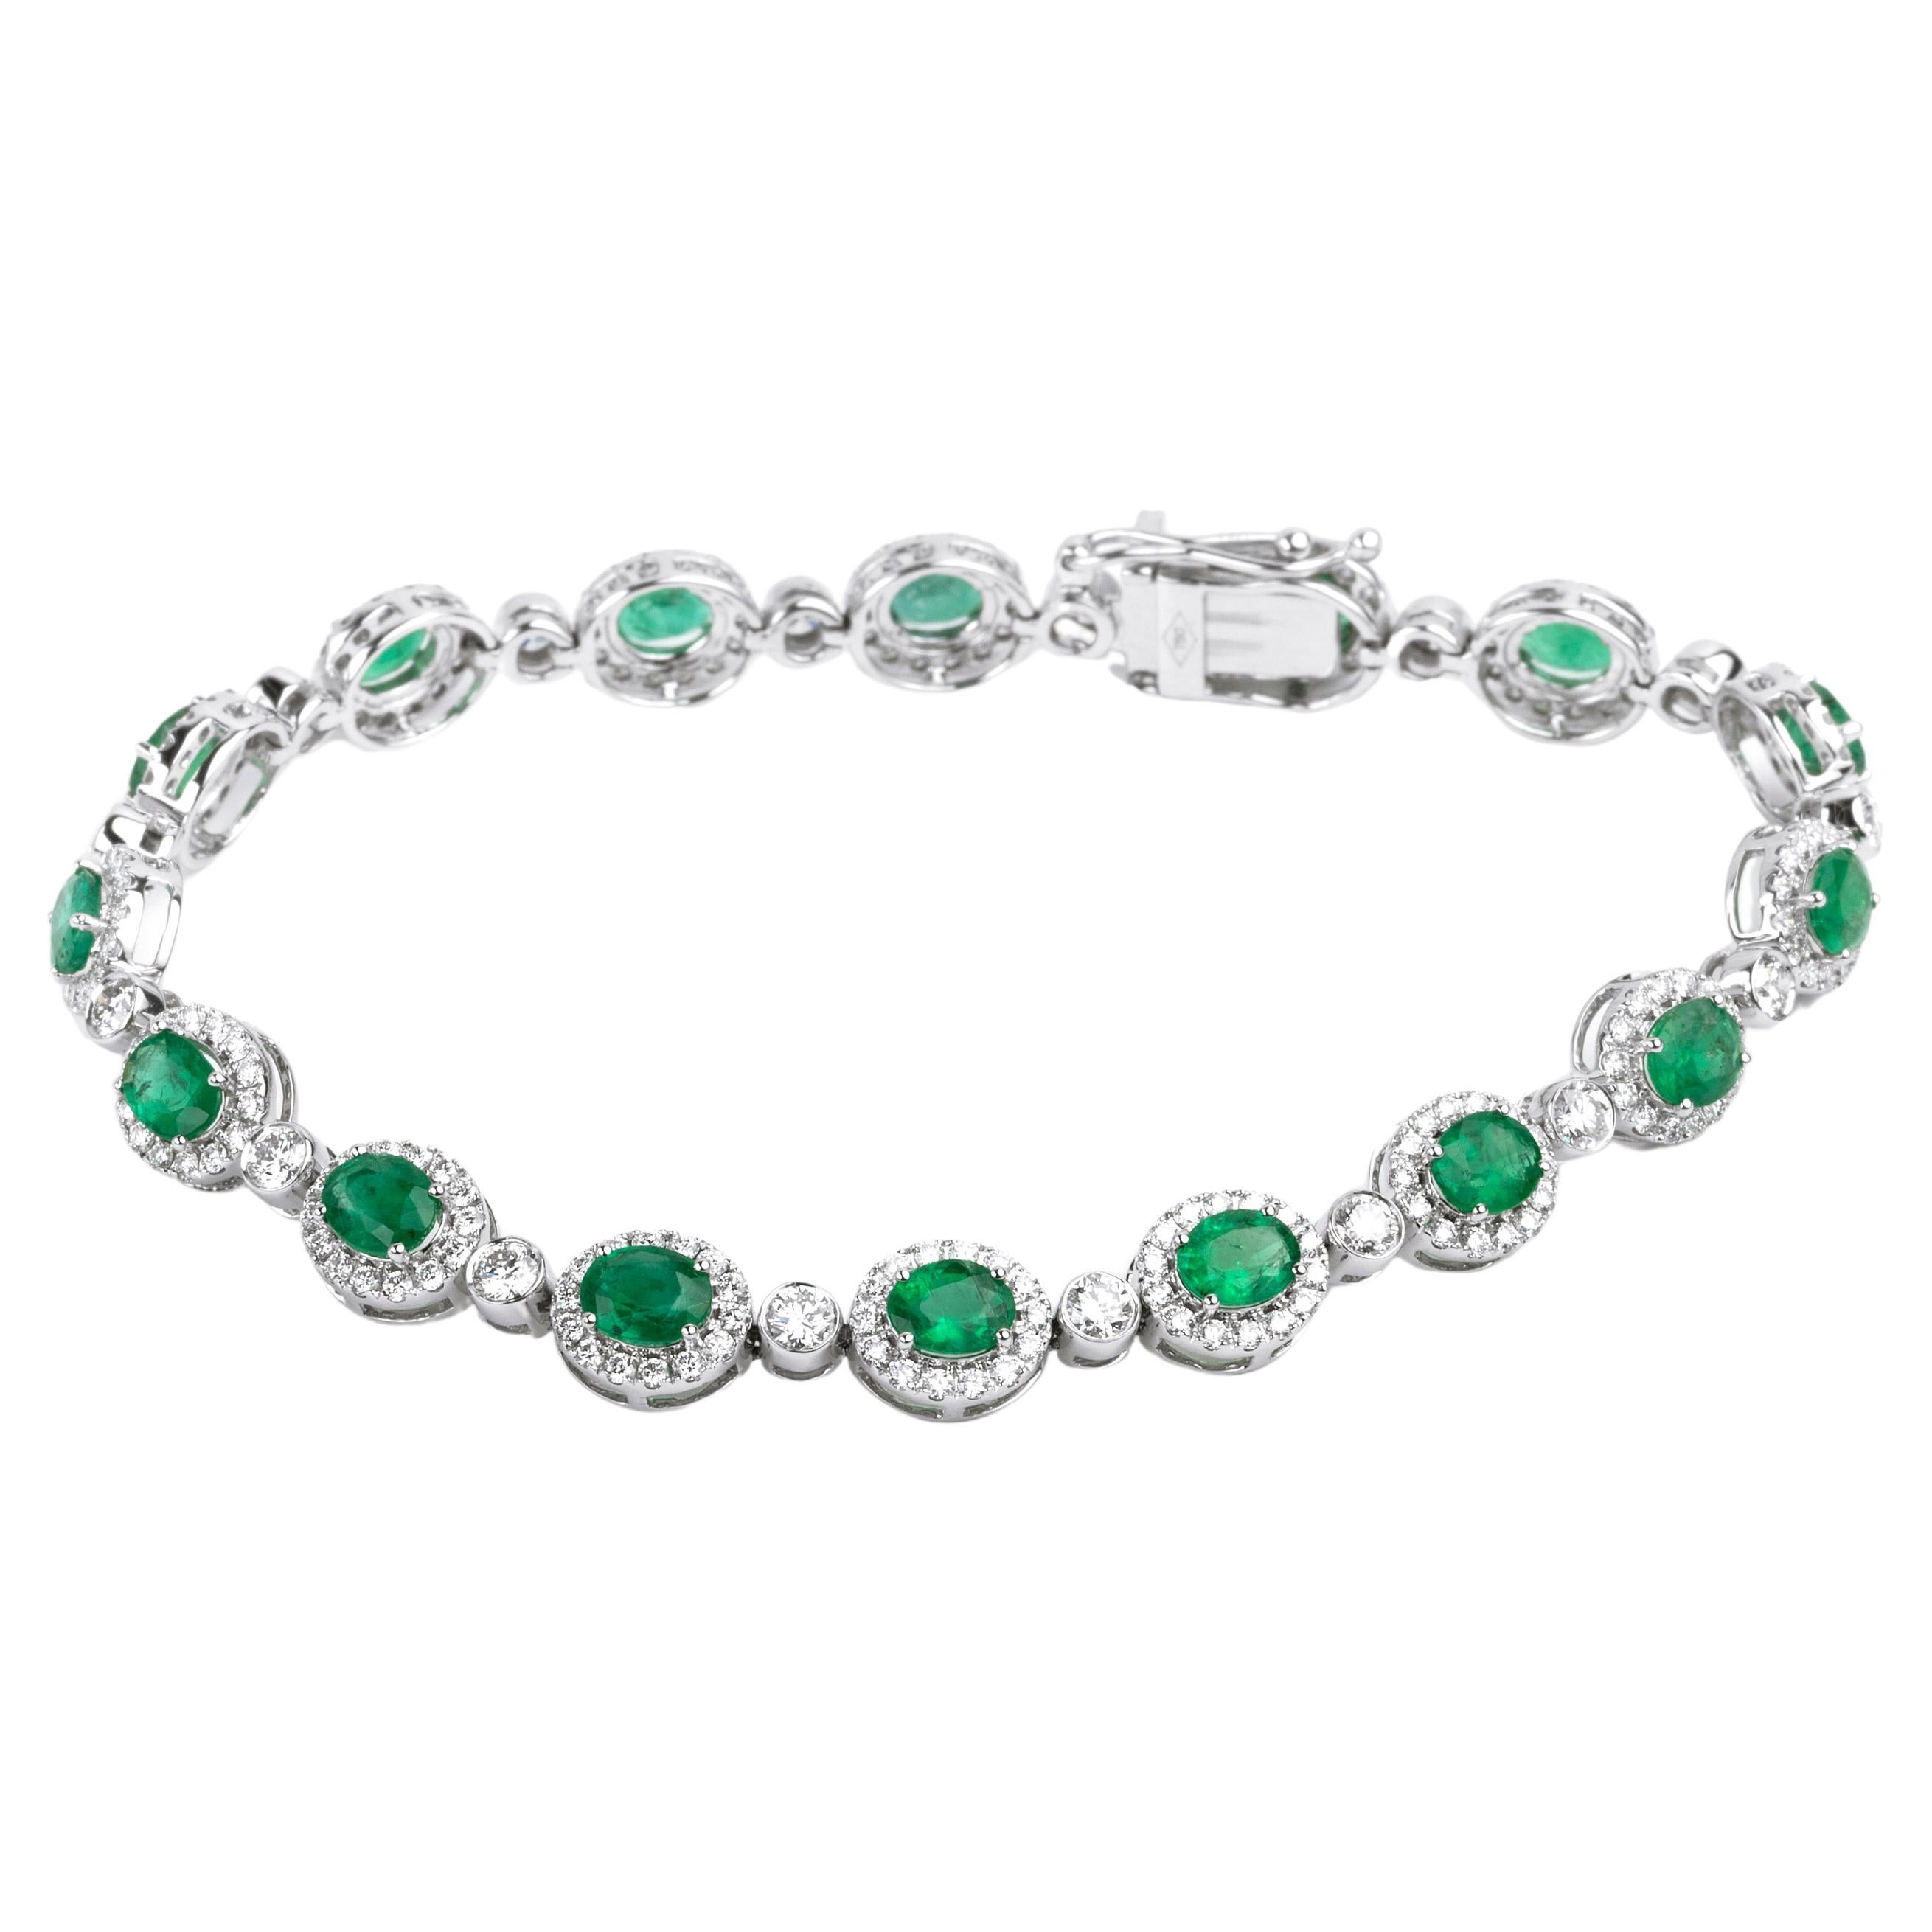 Exceptional 5 Ctw Oval Cut Natural Emerald Bracelet with diamond 18k White Gold For Sale